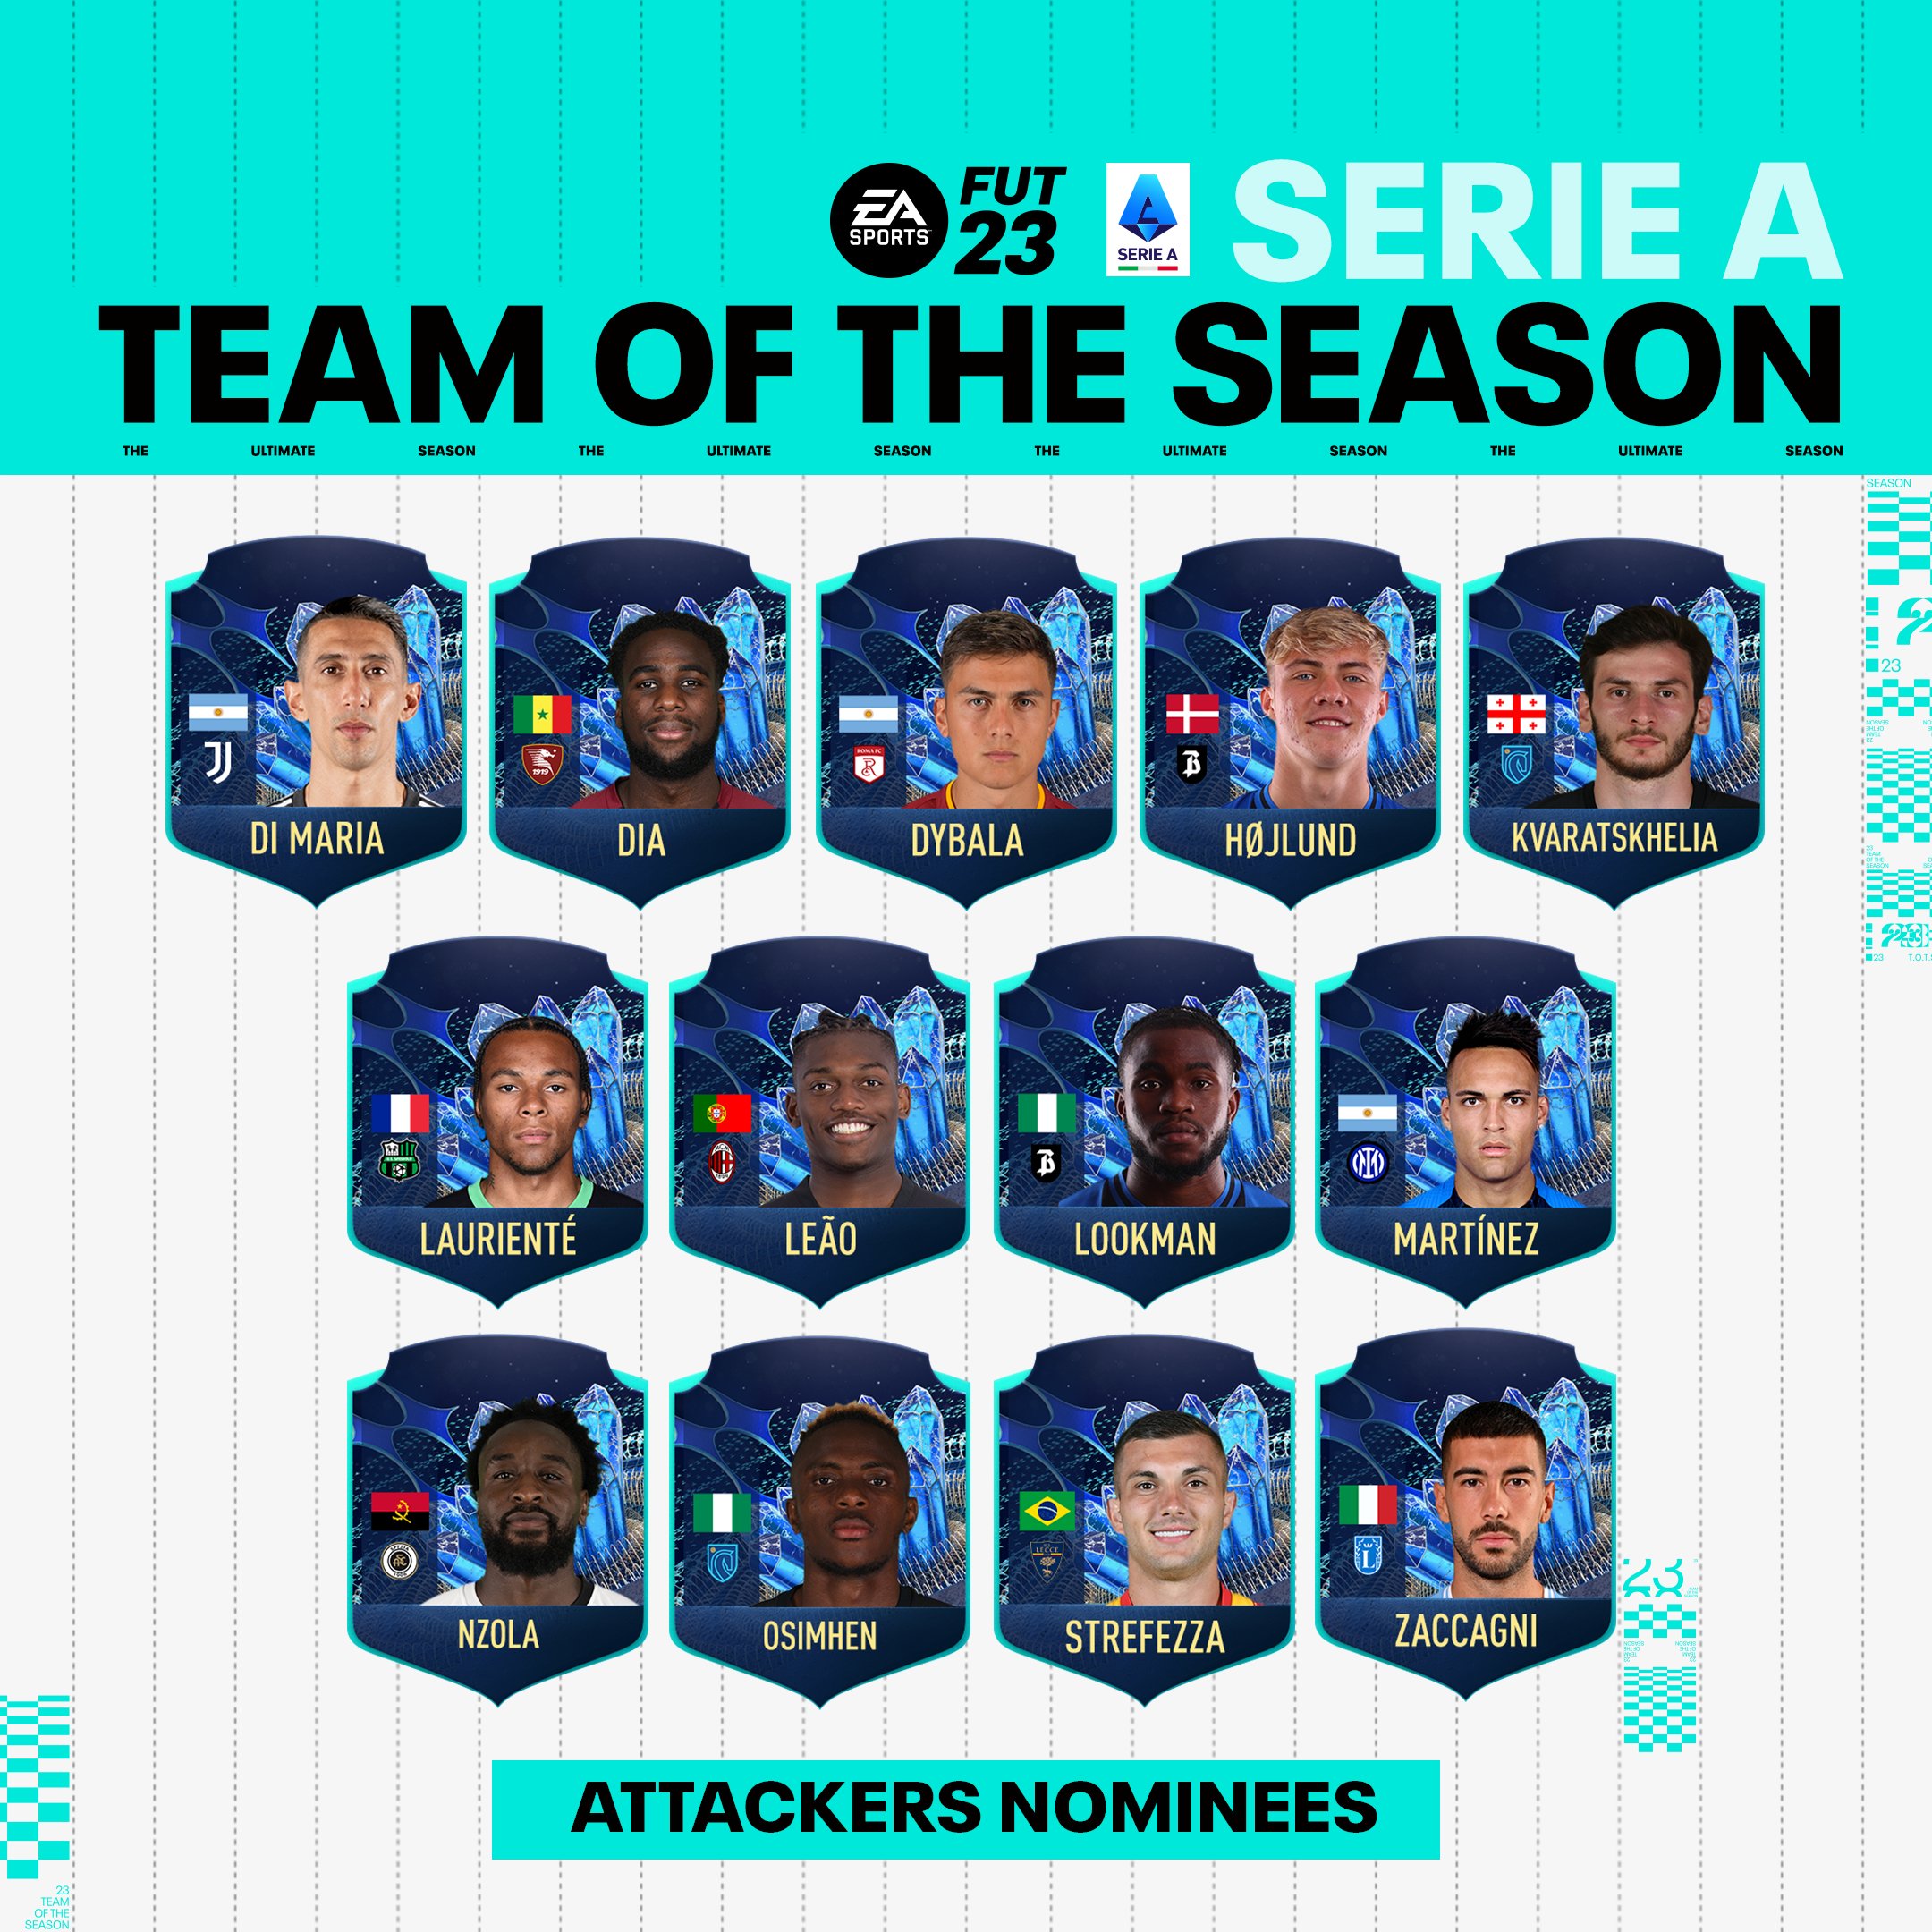 EA SPORTS™ ANNOUNCES FIFA 23 TEAM OF THE YEAR, IN THE FRANCHISE'S LARGEST  FOOTBALL COMMUNITY VOTE TO DATE